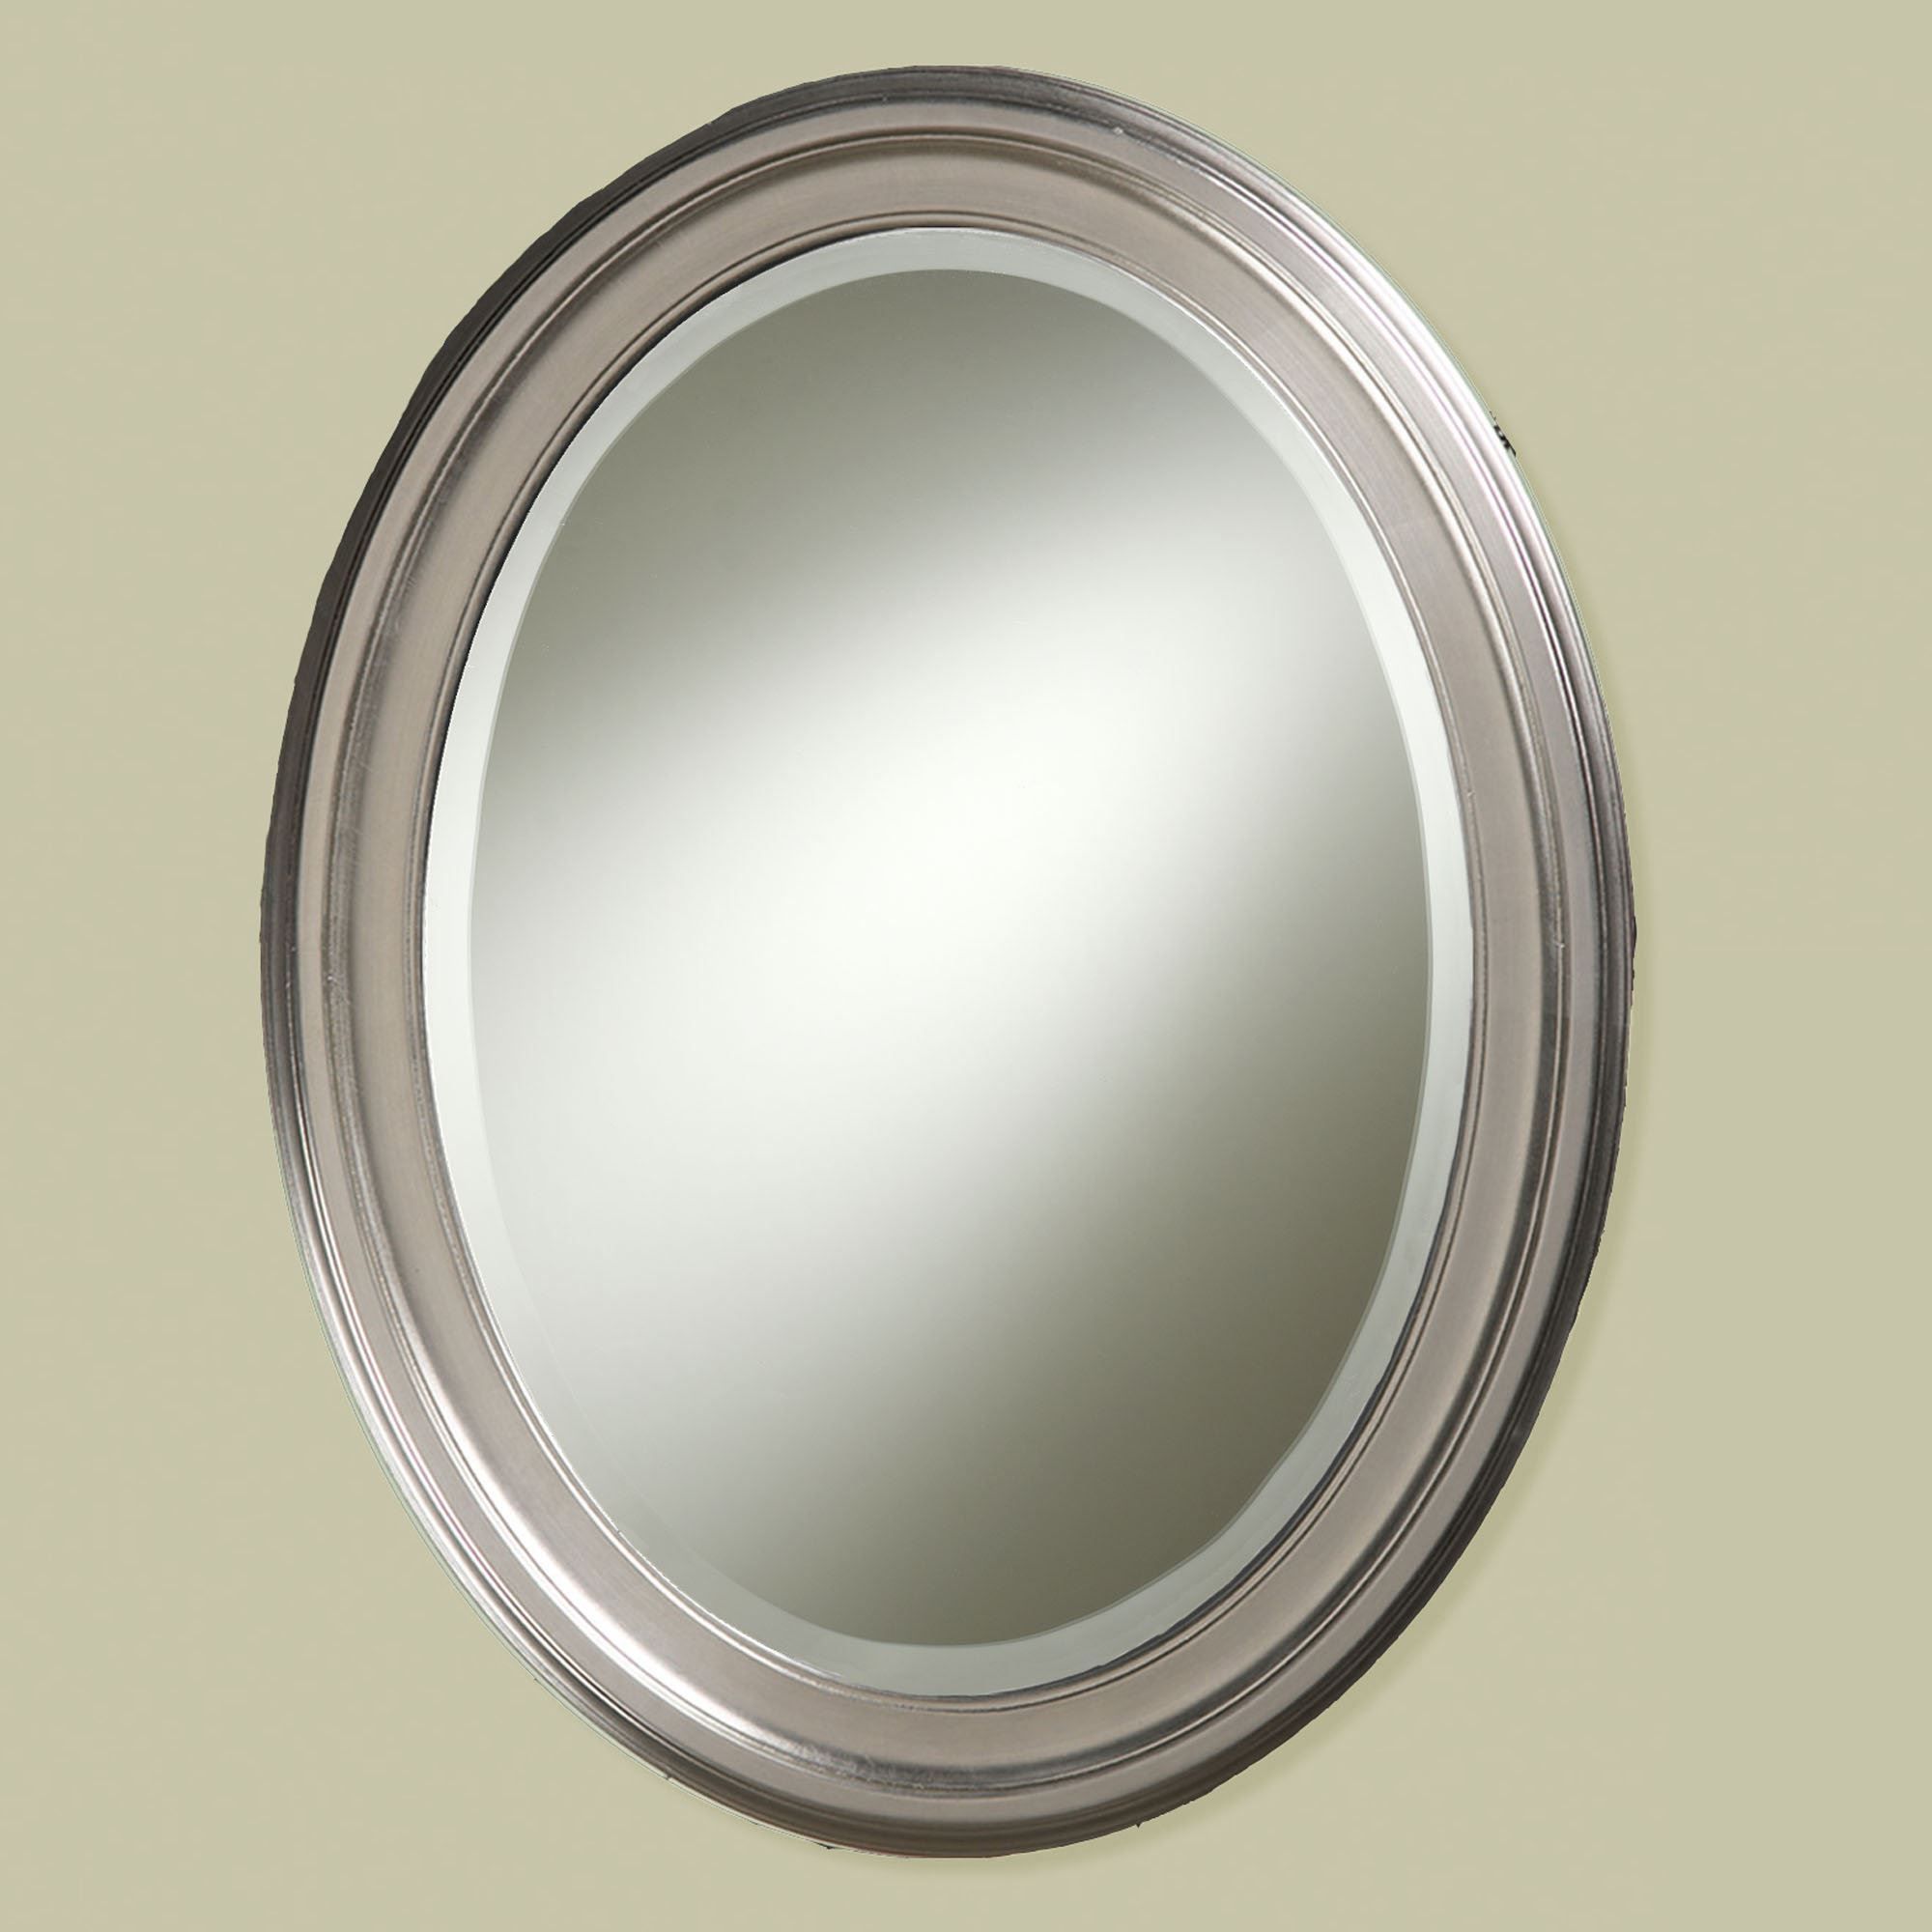 Loree Brushed Nickel Finish Oval Wall Mirror From Howard Elliott For Oxidized Nickel Wall Mirrors (View 8 of 15)